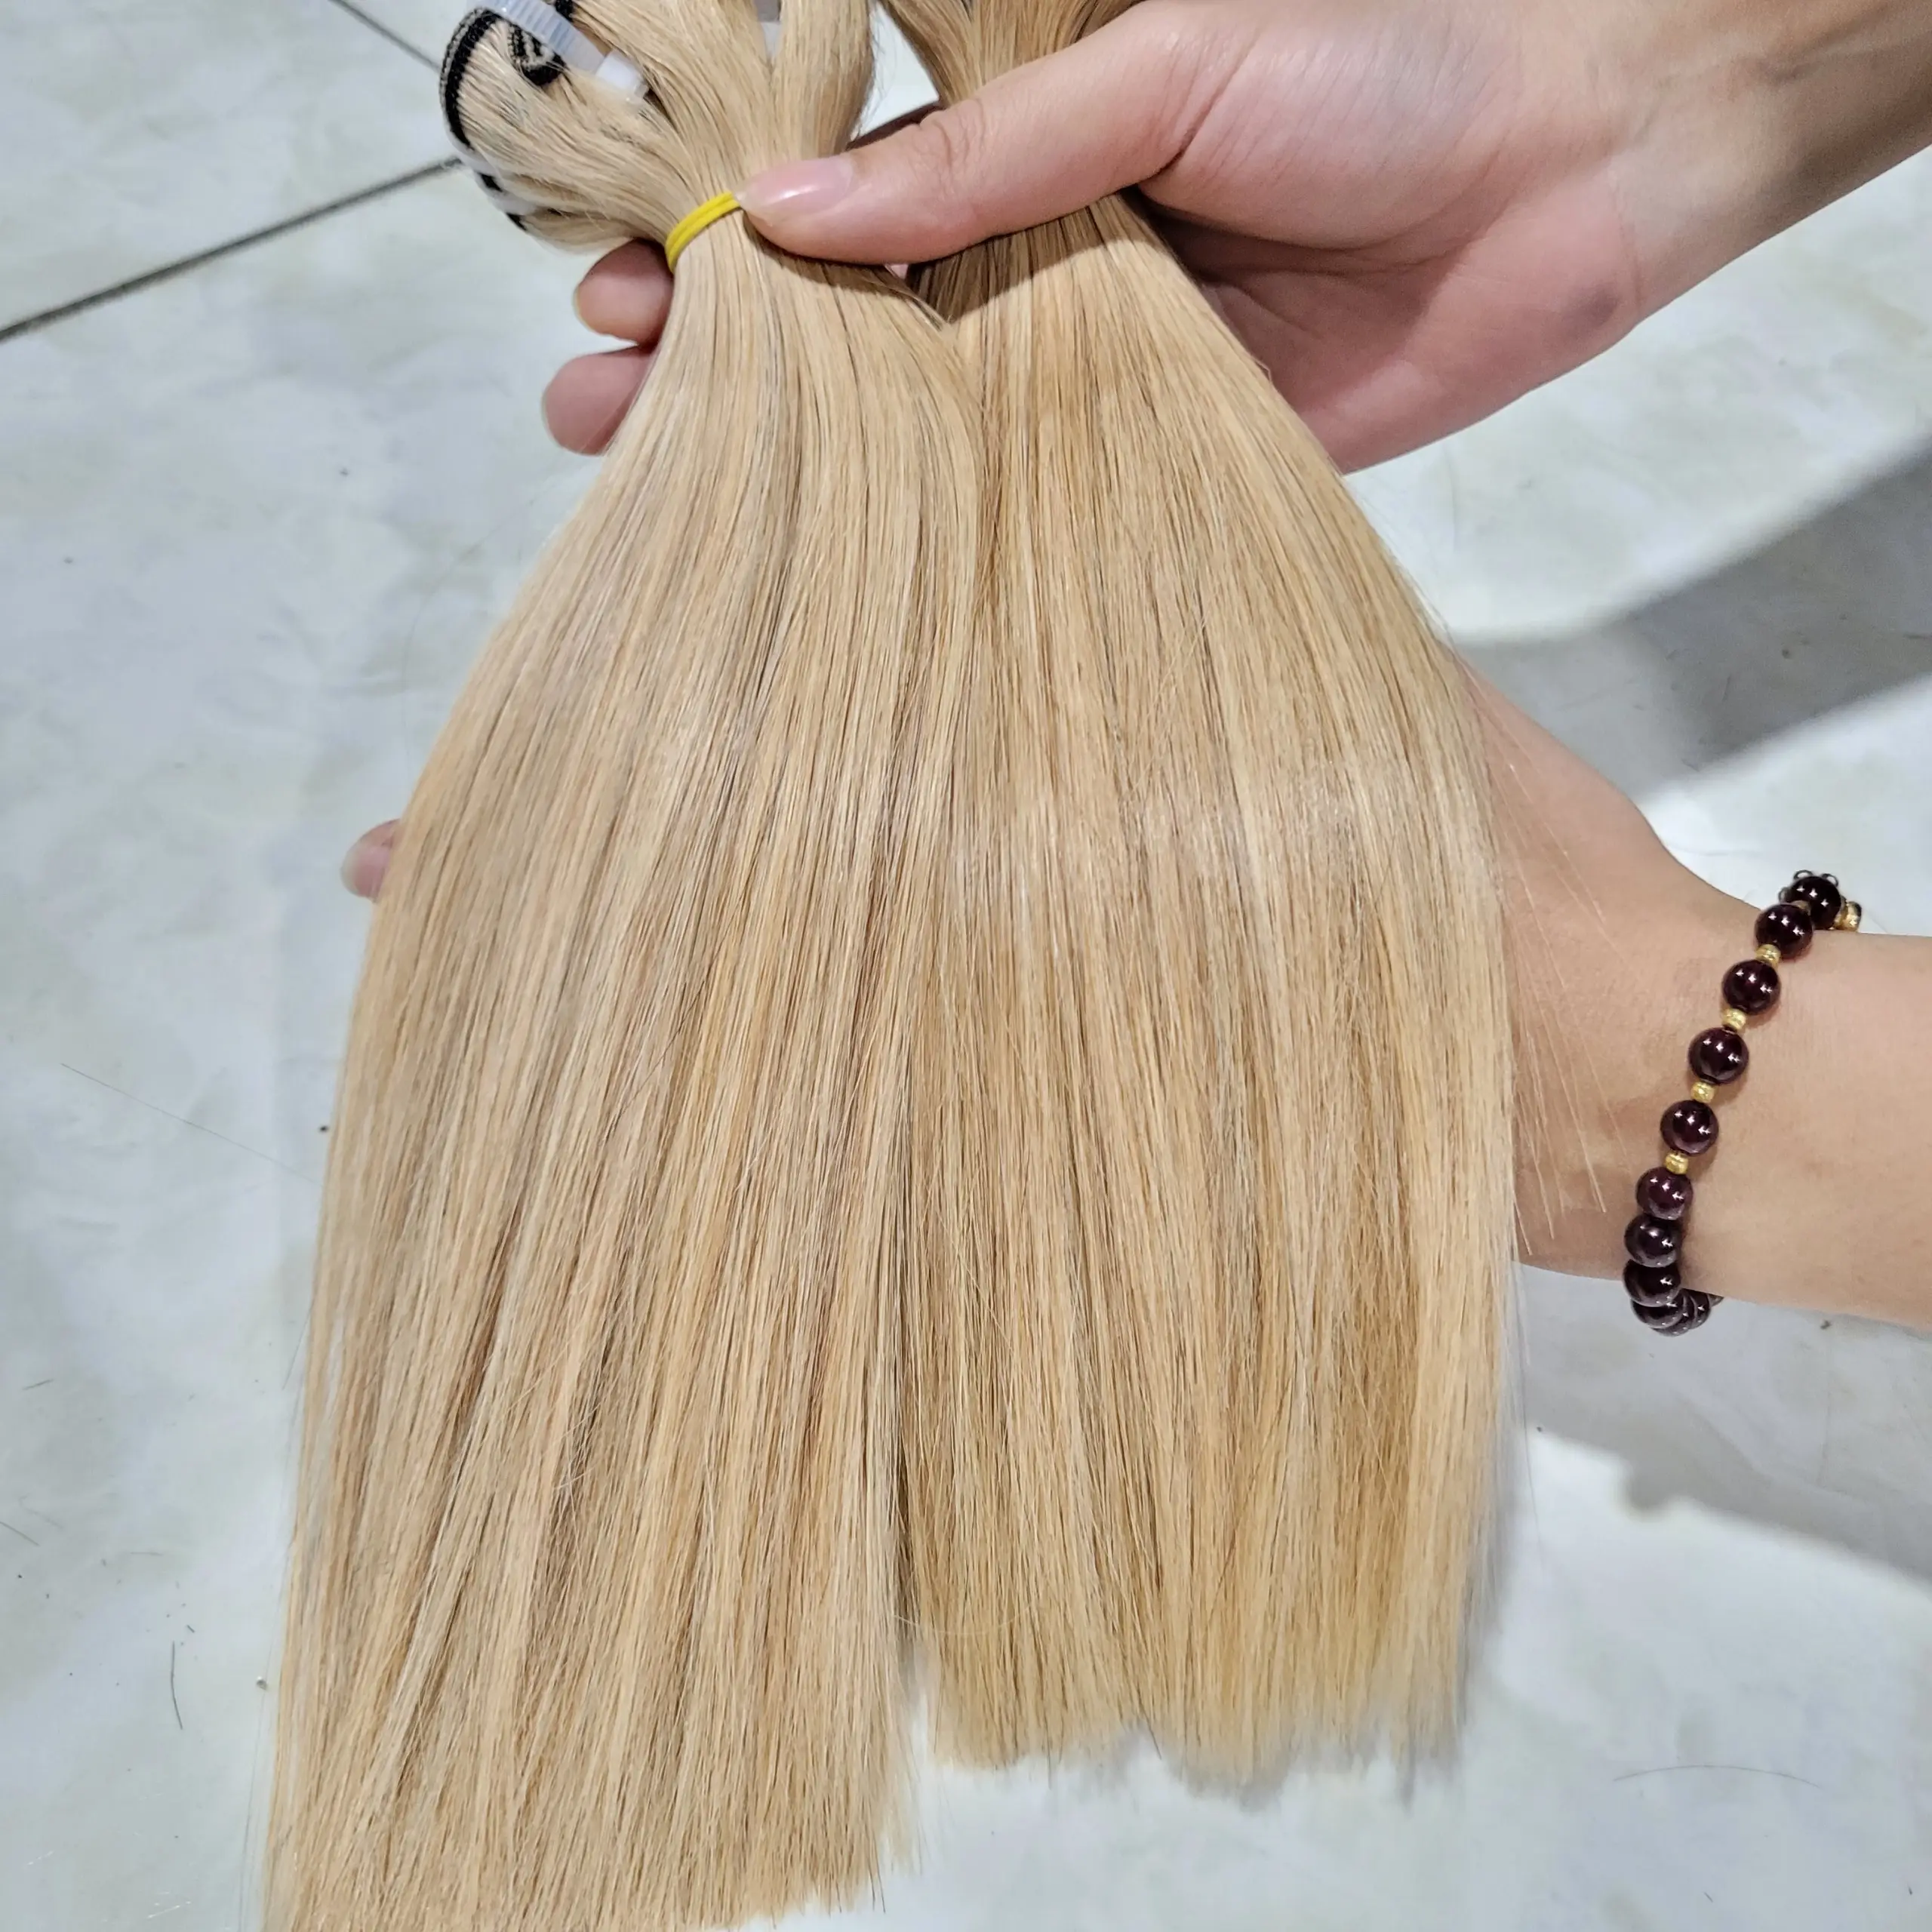 12 hair extensions